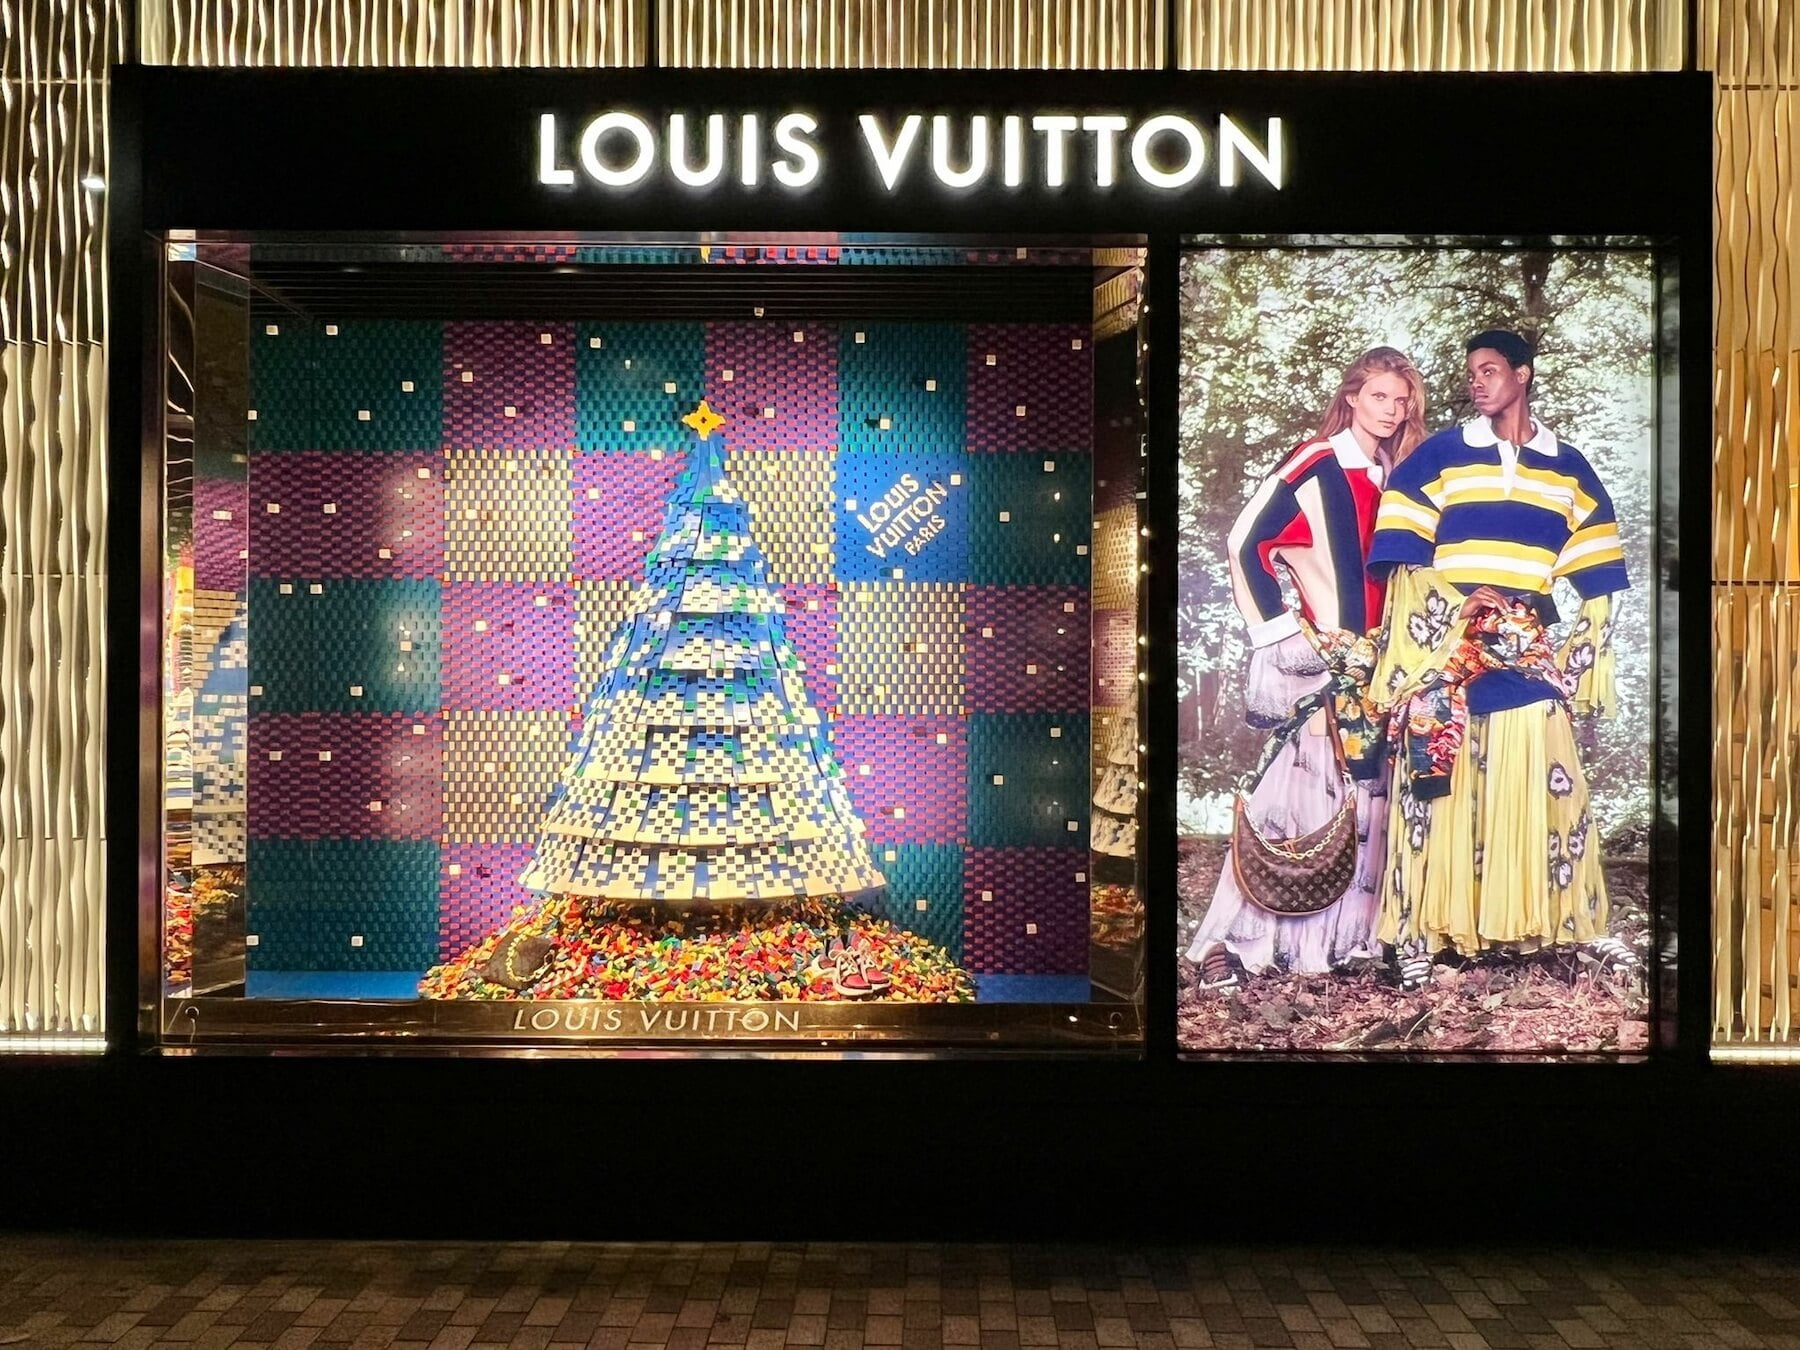 Ten Craves: Lego At Louis Vuitton, Gucci Gets Fabulously Festive And More!  - 10 Magazine